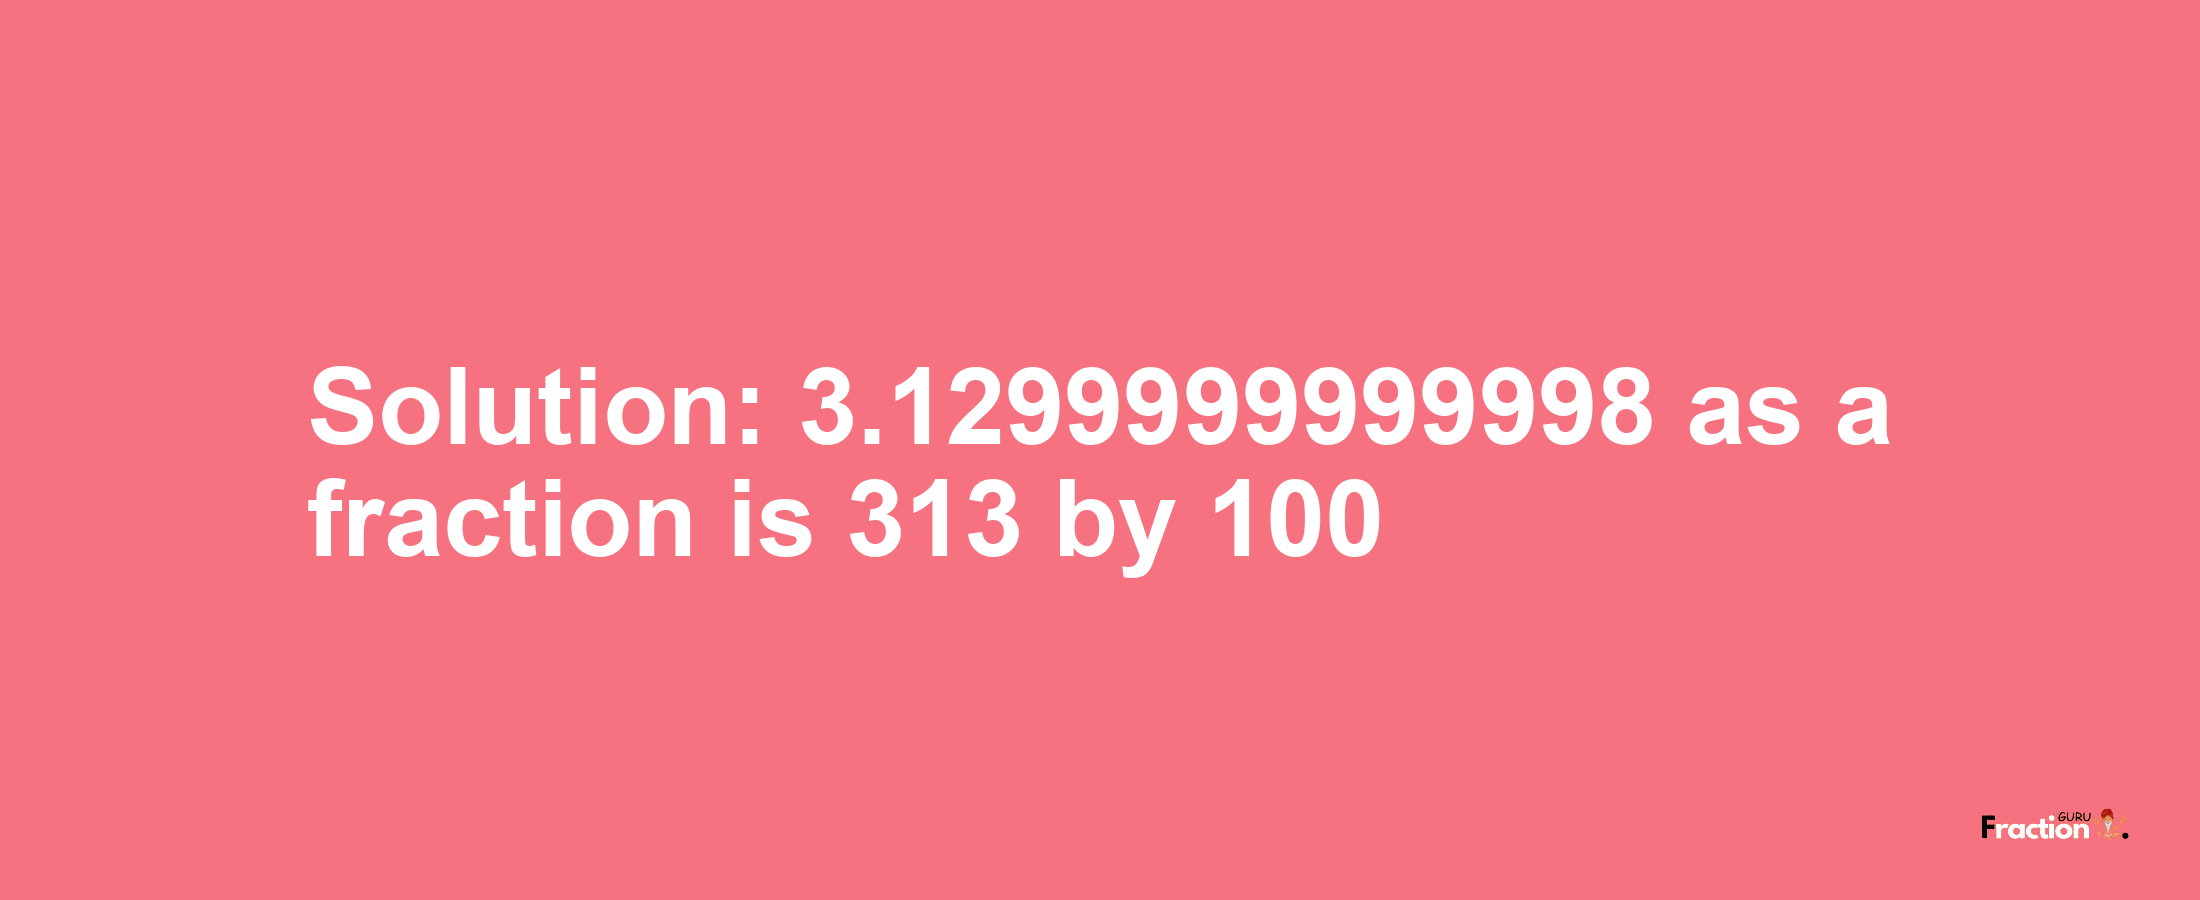 Solution:3.1299999999998 as a fraction is 313/100